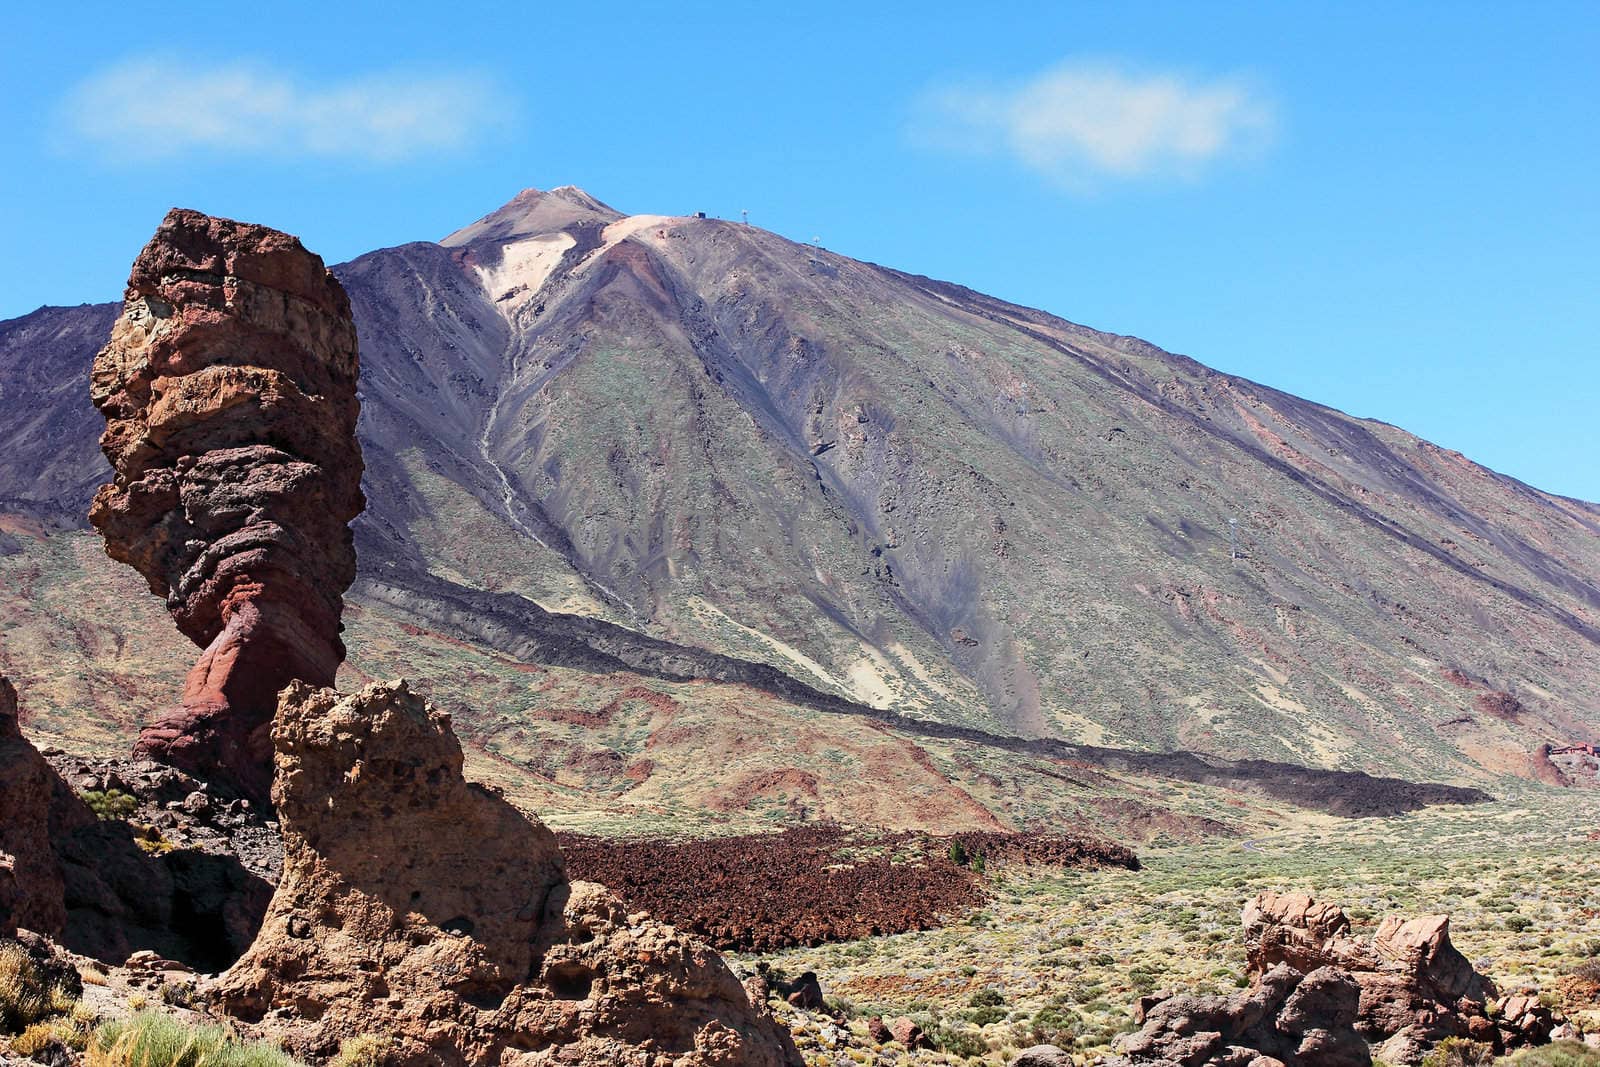 The conical volcano Mount Teide or El Teide in Tenerife is Spains highest mountain. It has featured as the location of many hollywood films and is the premier tourist attraction in the Canaries